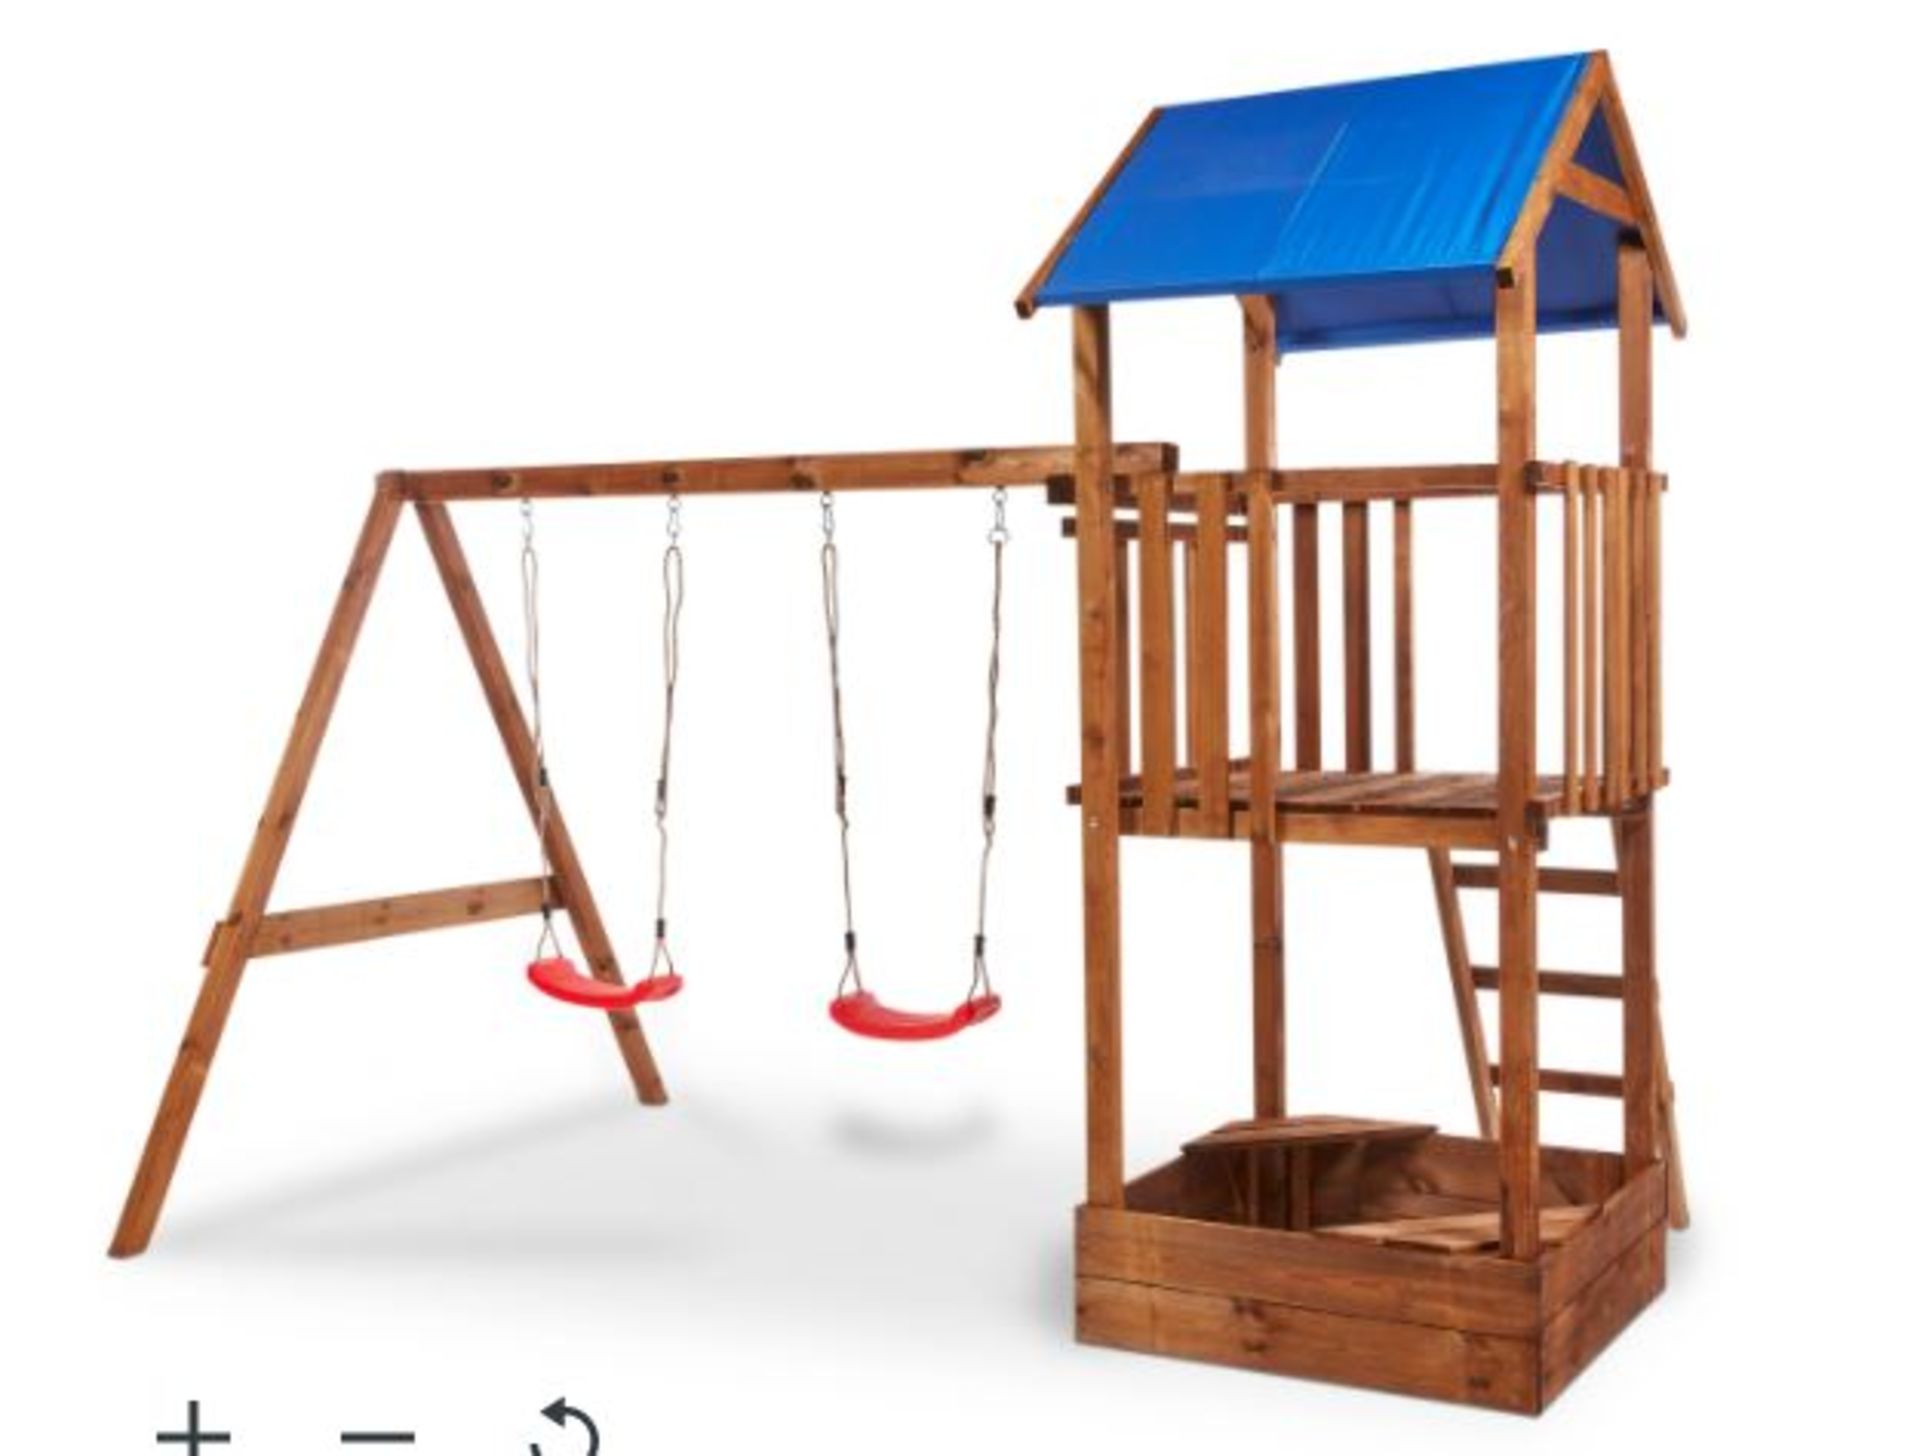 New Janer Wooden Swing Set. This Janek swing set comes with swing seats, swing hooks, tower, roof